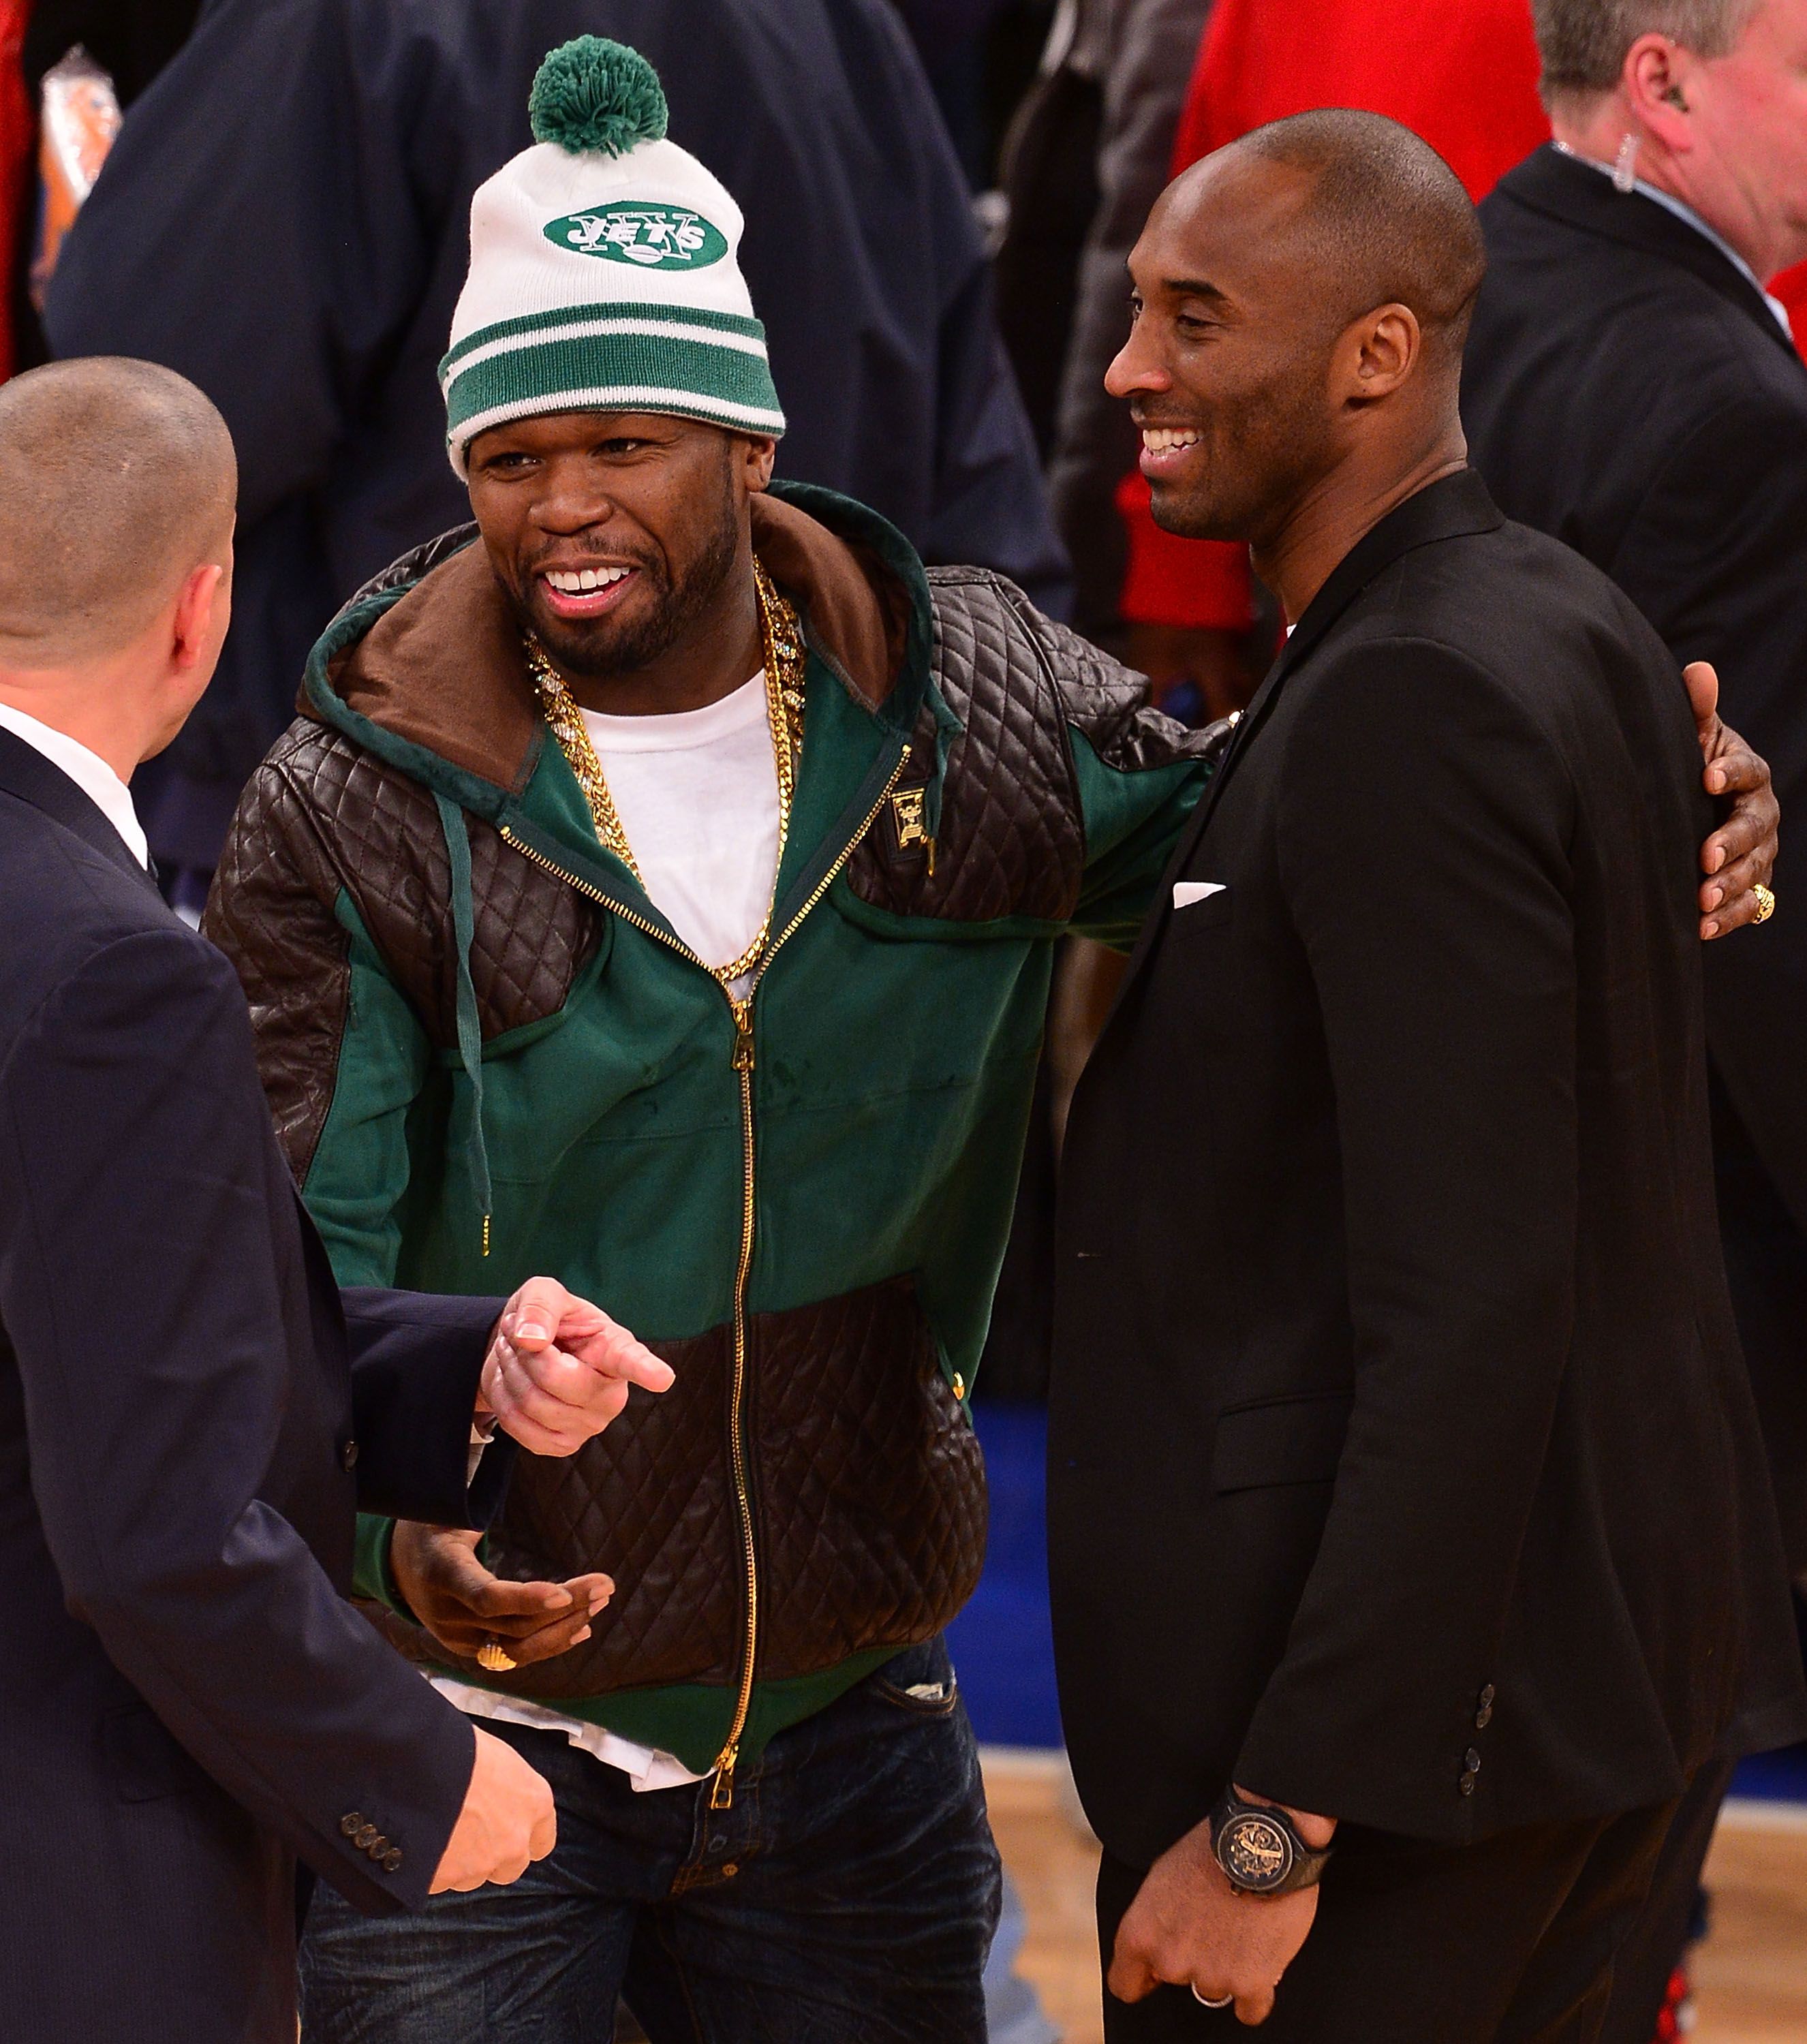 50 Cent and Kobe Bryant unite at an NBA game | Source: Getty Images/GlobalImagesUkraine